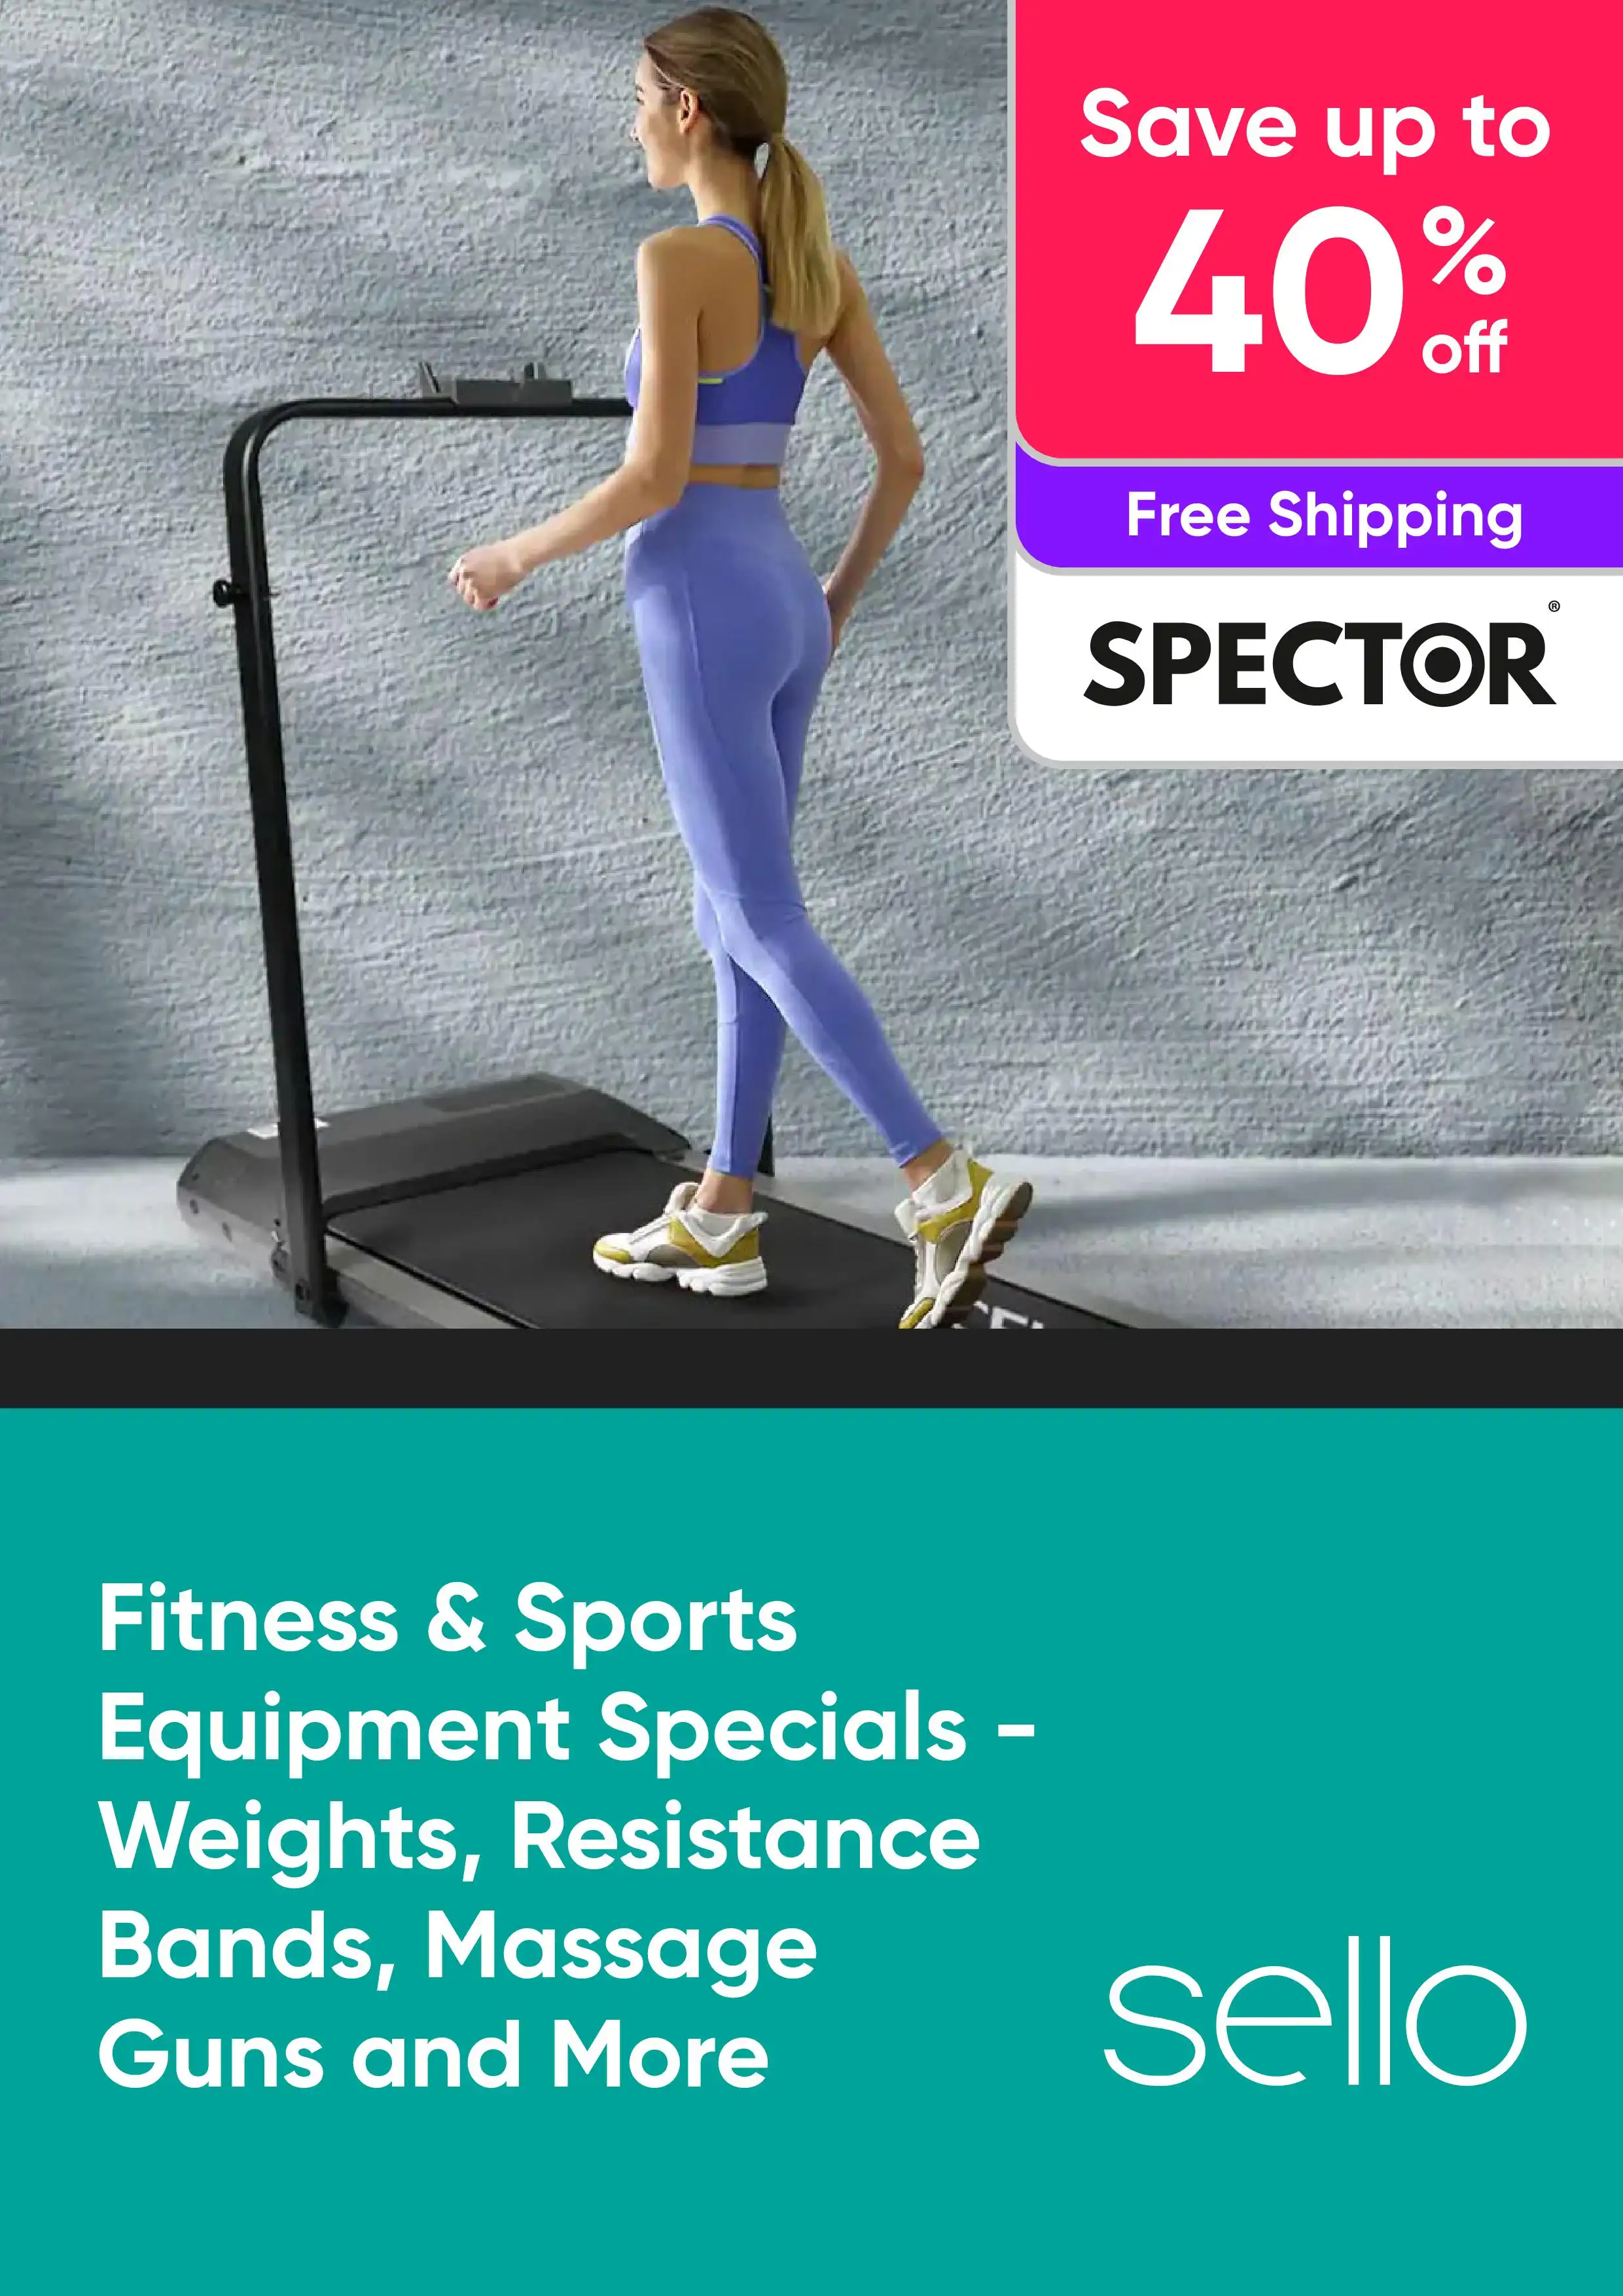 Fitness & Sports Equipment Specials - Weights, Massage Guns and More - Spector - Up to 40% Off